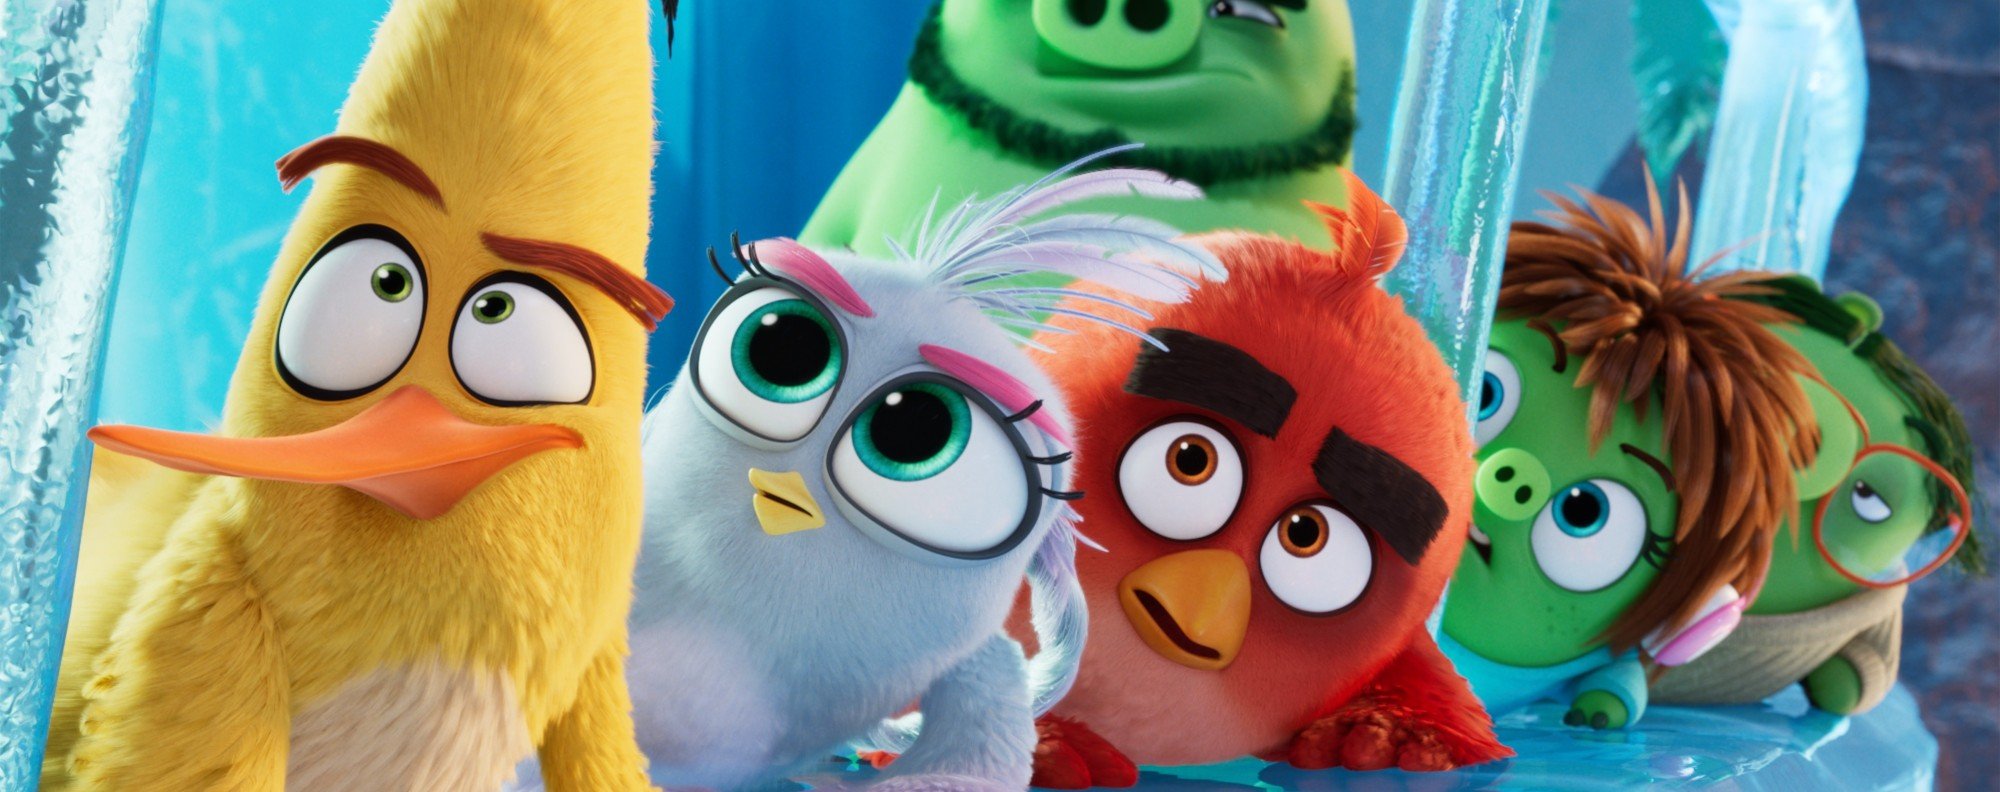 The Angry Birds Movie 2 review: Awkwafina, Leslie Jones join fun and breezy  animated sequel | South China Morning Post